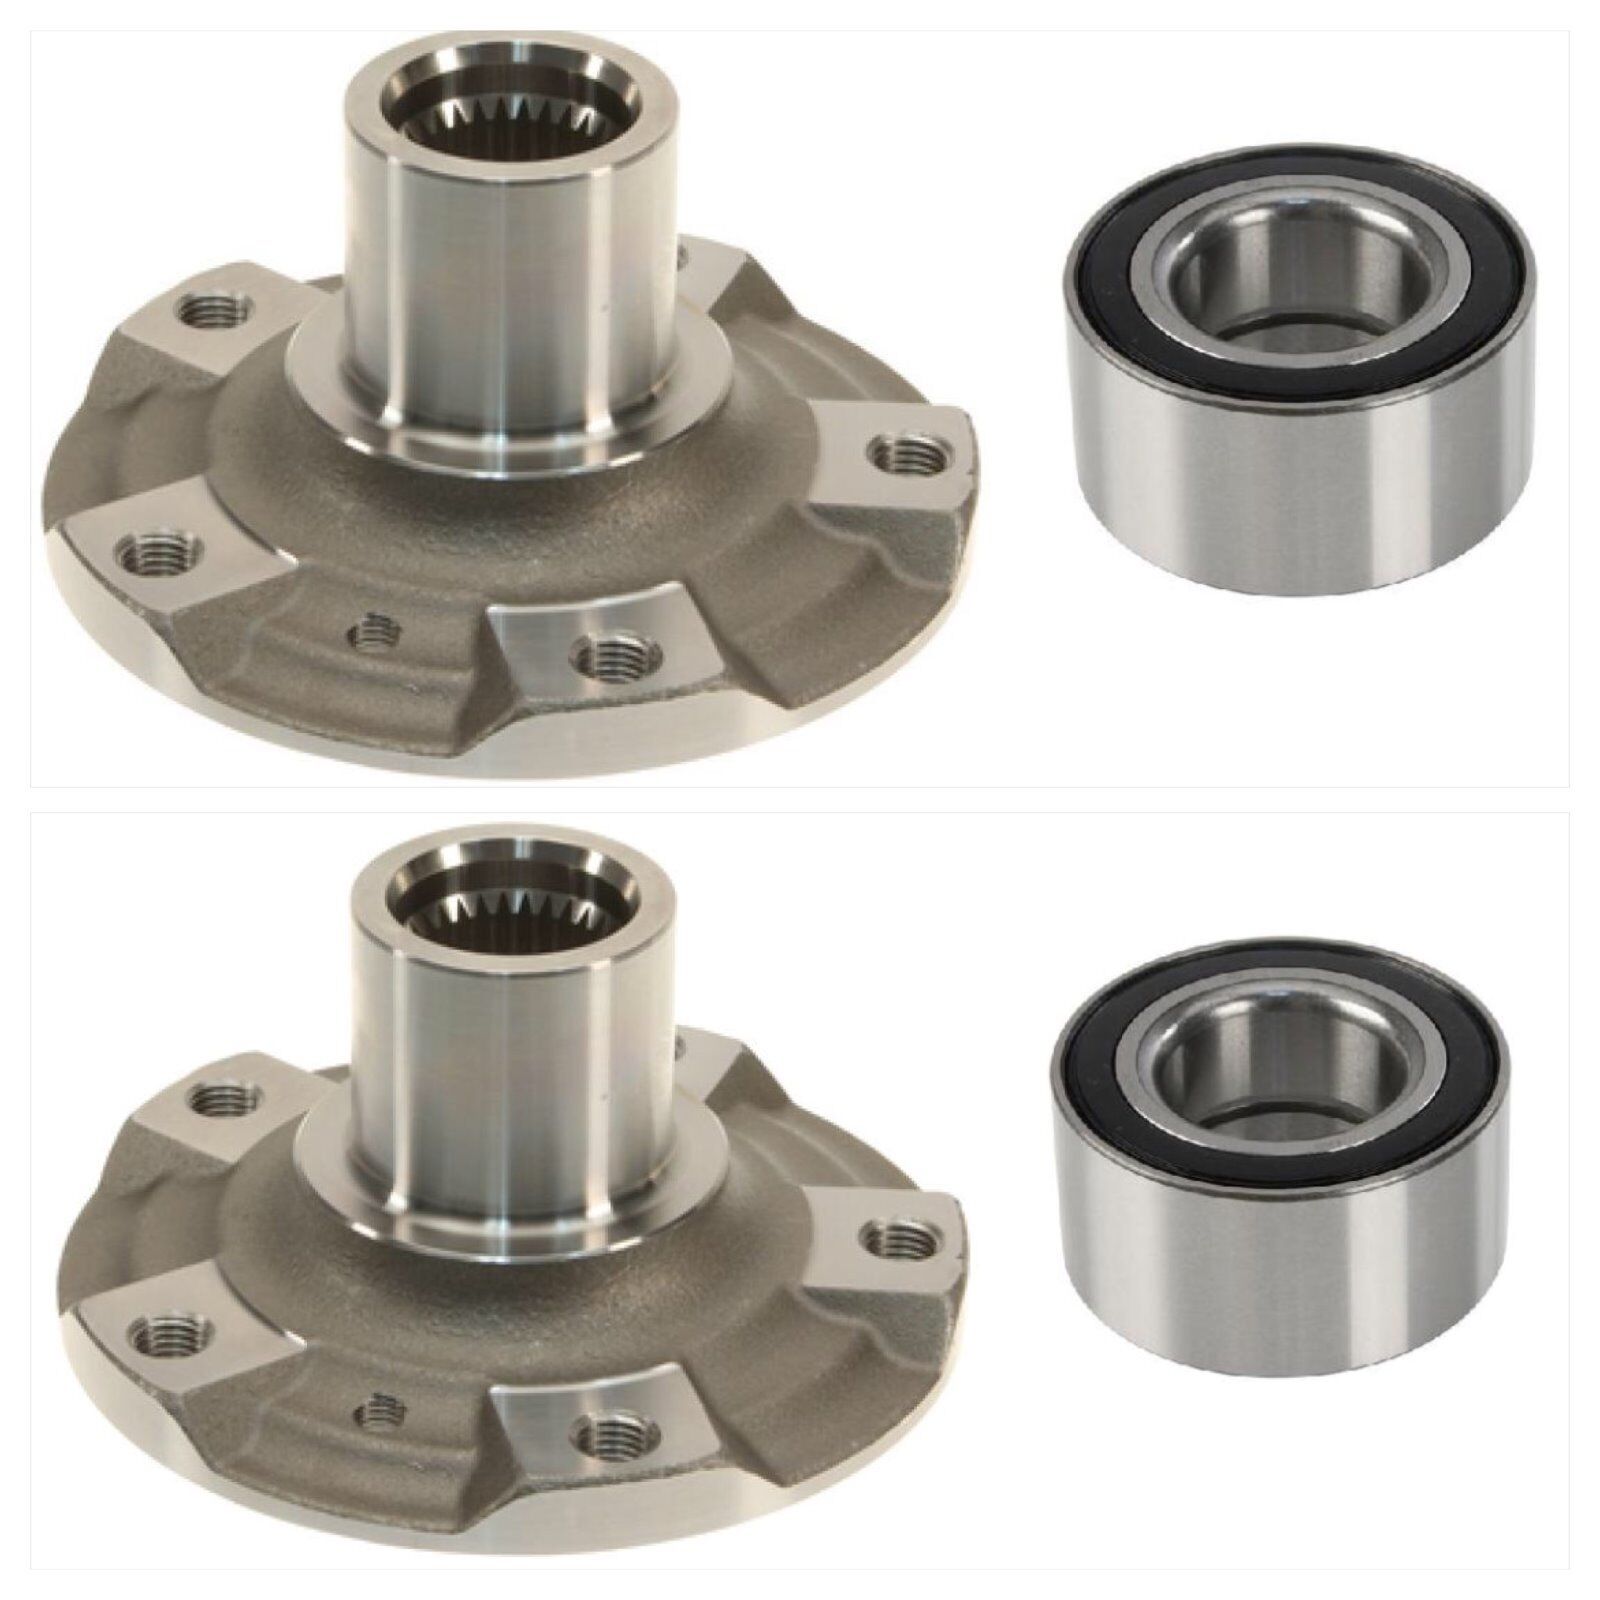 FRONT WHEEL HUB & BEARING FOR BMW 325Xi-328Xi-335Xi 2006-2013 LEFT OR RIGHT PAIR